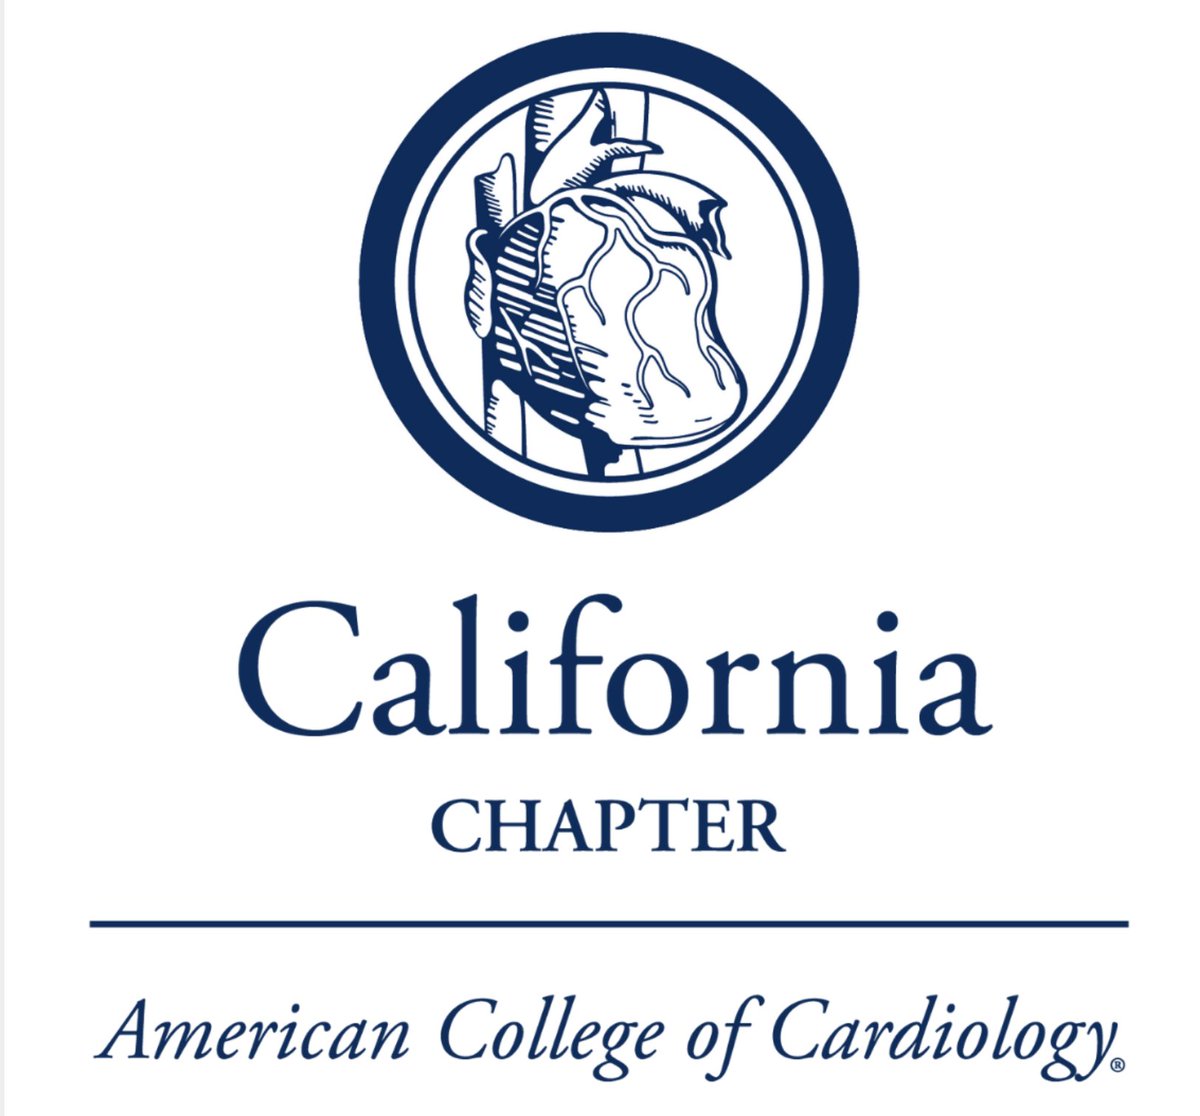 Register for our next Connecting California lecture this Thursday 12/8 and learn all about cardio-oncology from @Vinisha_Garg at @LLUHealth! @AAHilliardMD @JamalRanaMD @CaliforniaACC @acc_fit @CardioDocNikhil @purviparwani @LiannaSC. Register here: us06web.zoom.us/meeting/regist…